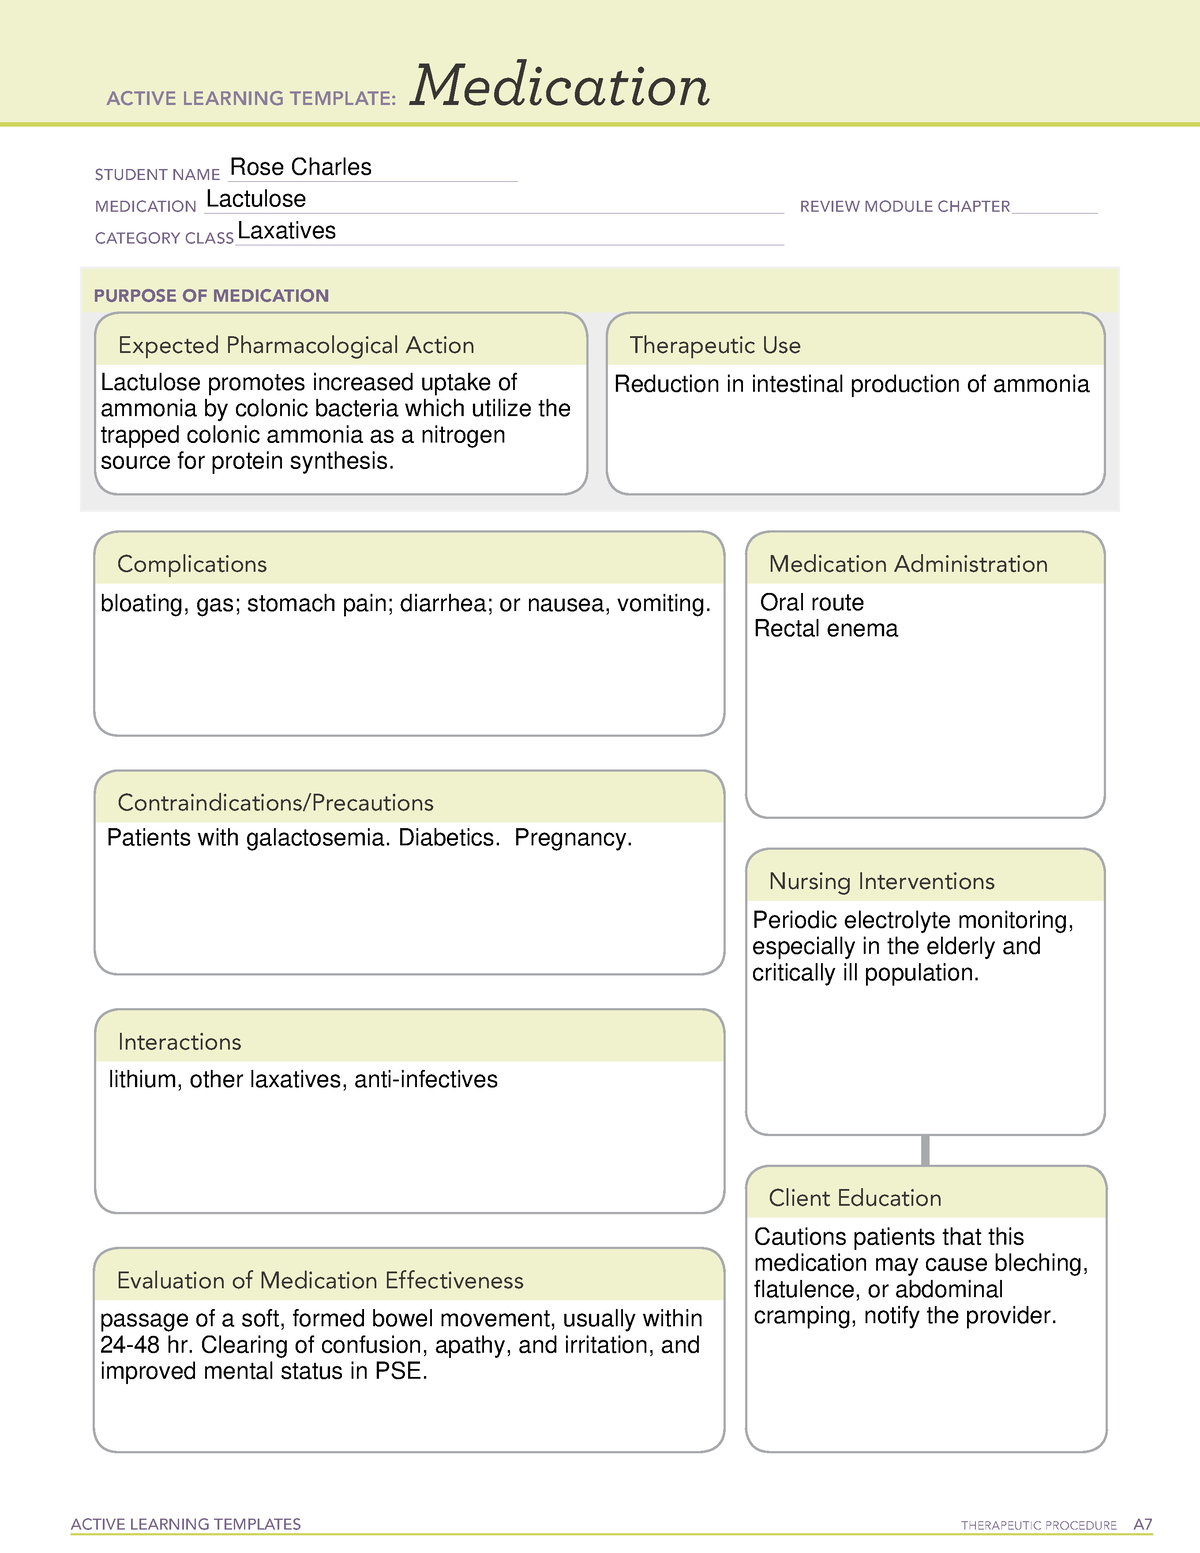 active-learning-template-lactulose-active-learning-templates